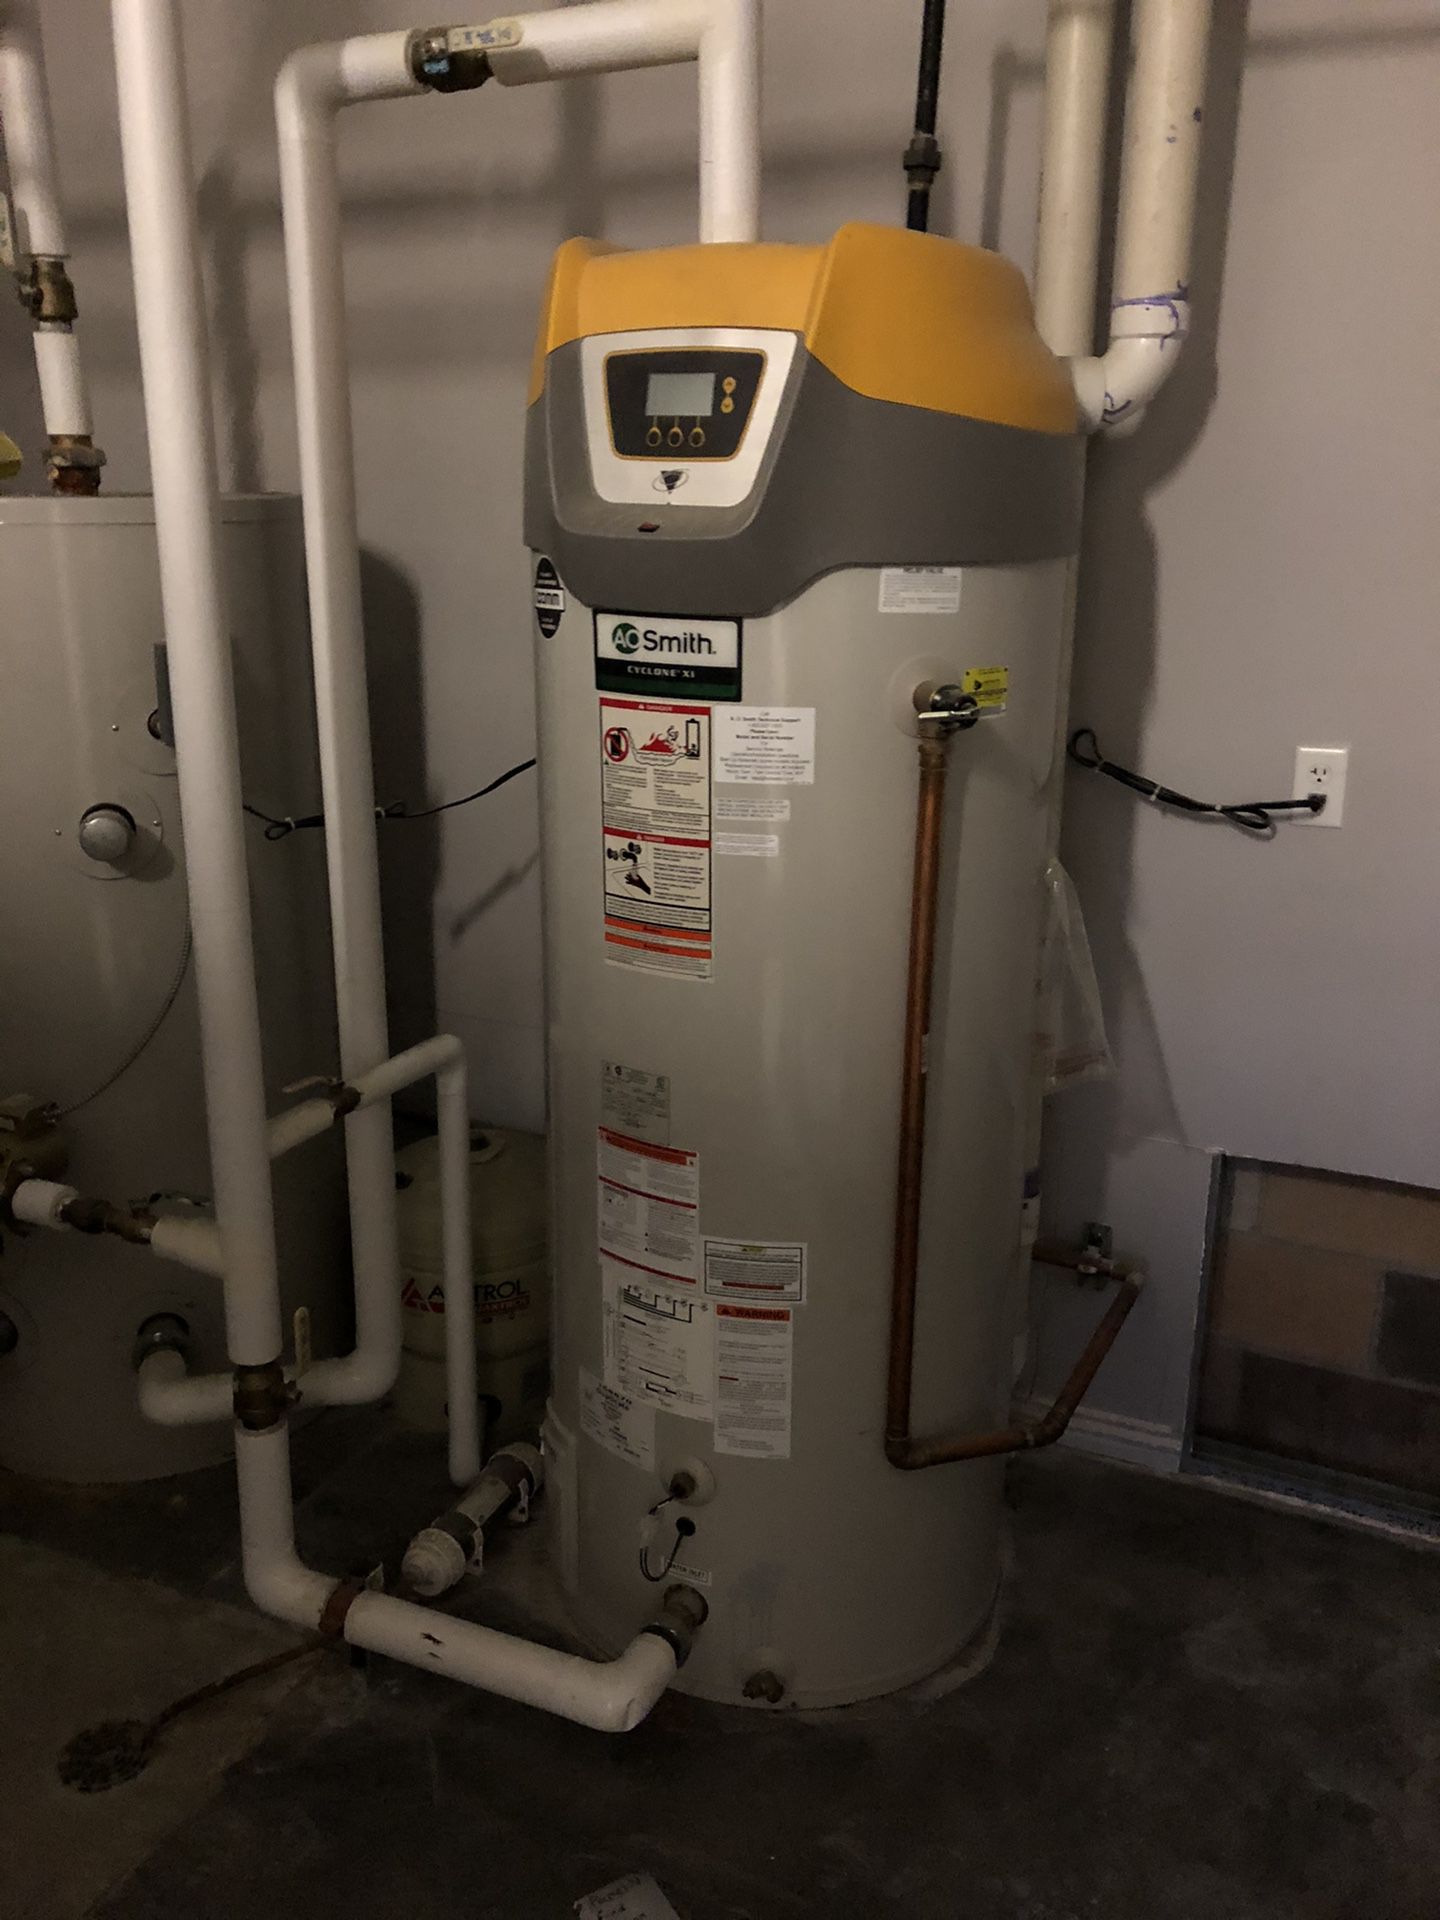 2 Commercial Hot Water Heaters. 100 Gallon and 119 Gallon.